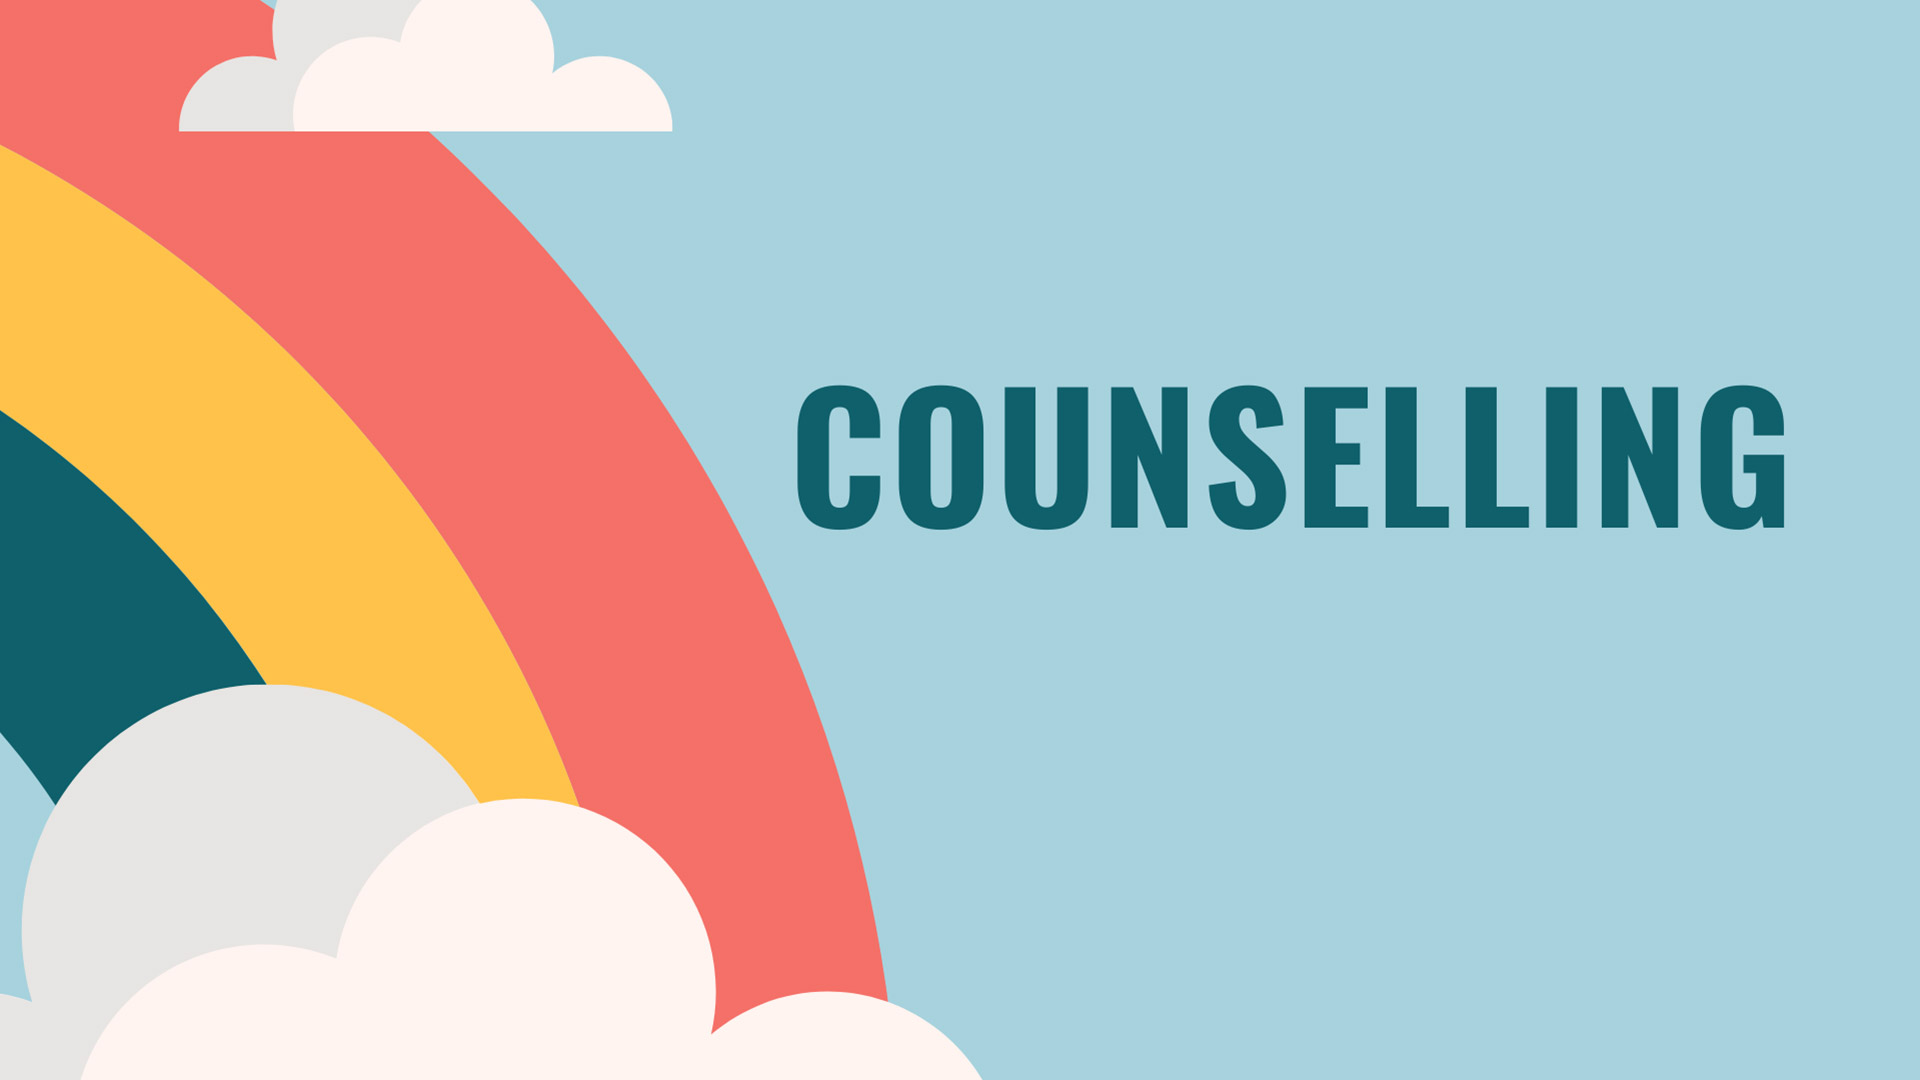 Counselling text banner